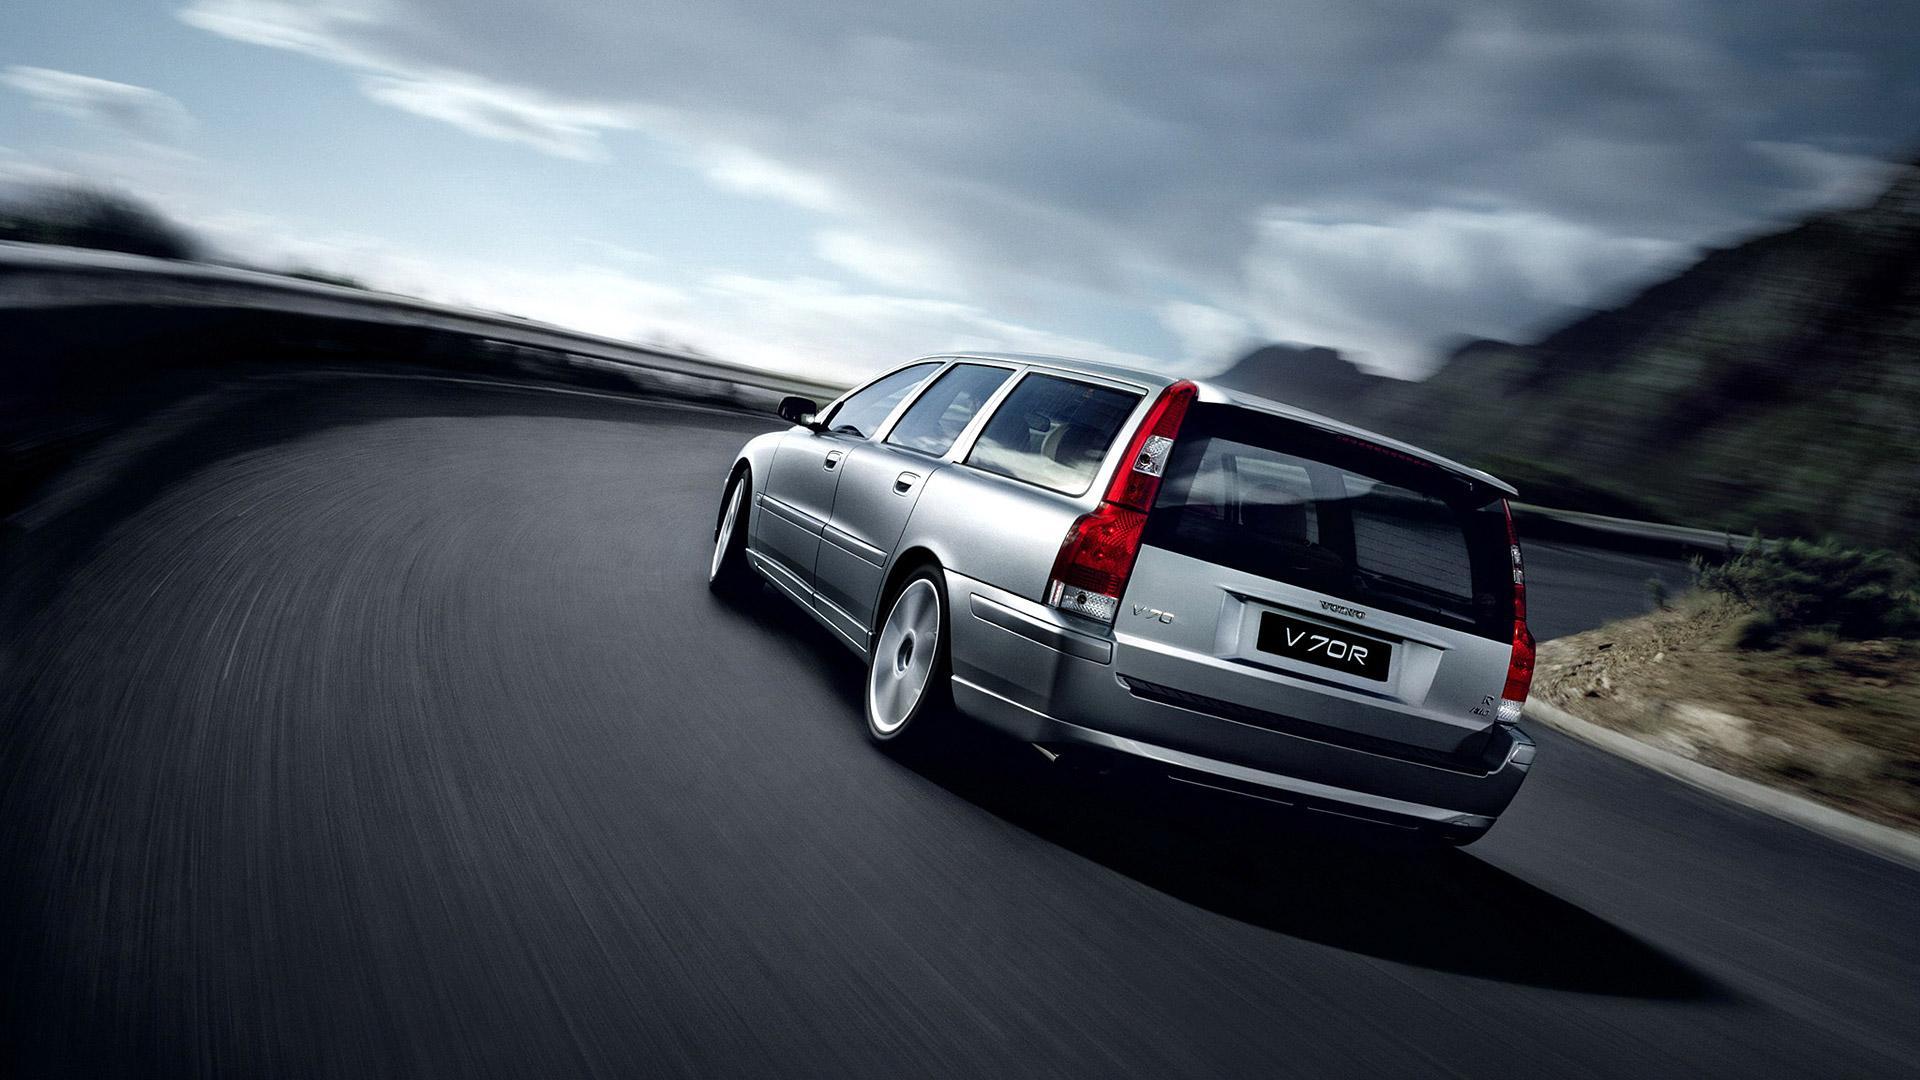 Volvo V70 Wallpapers Top Free Volvo V70 Backgrounds Wallpaperaccess